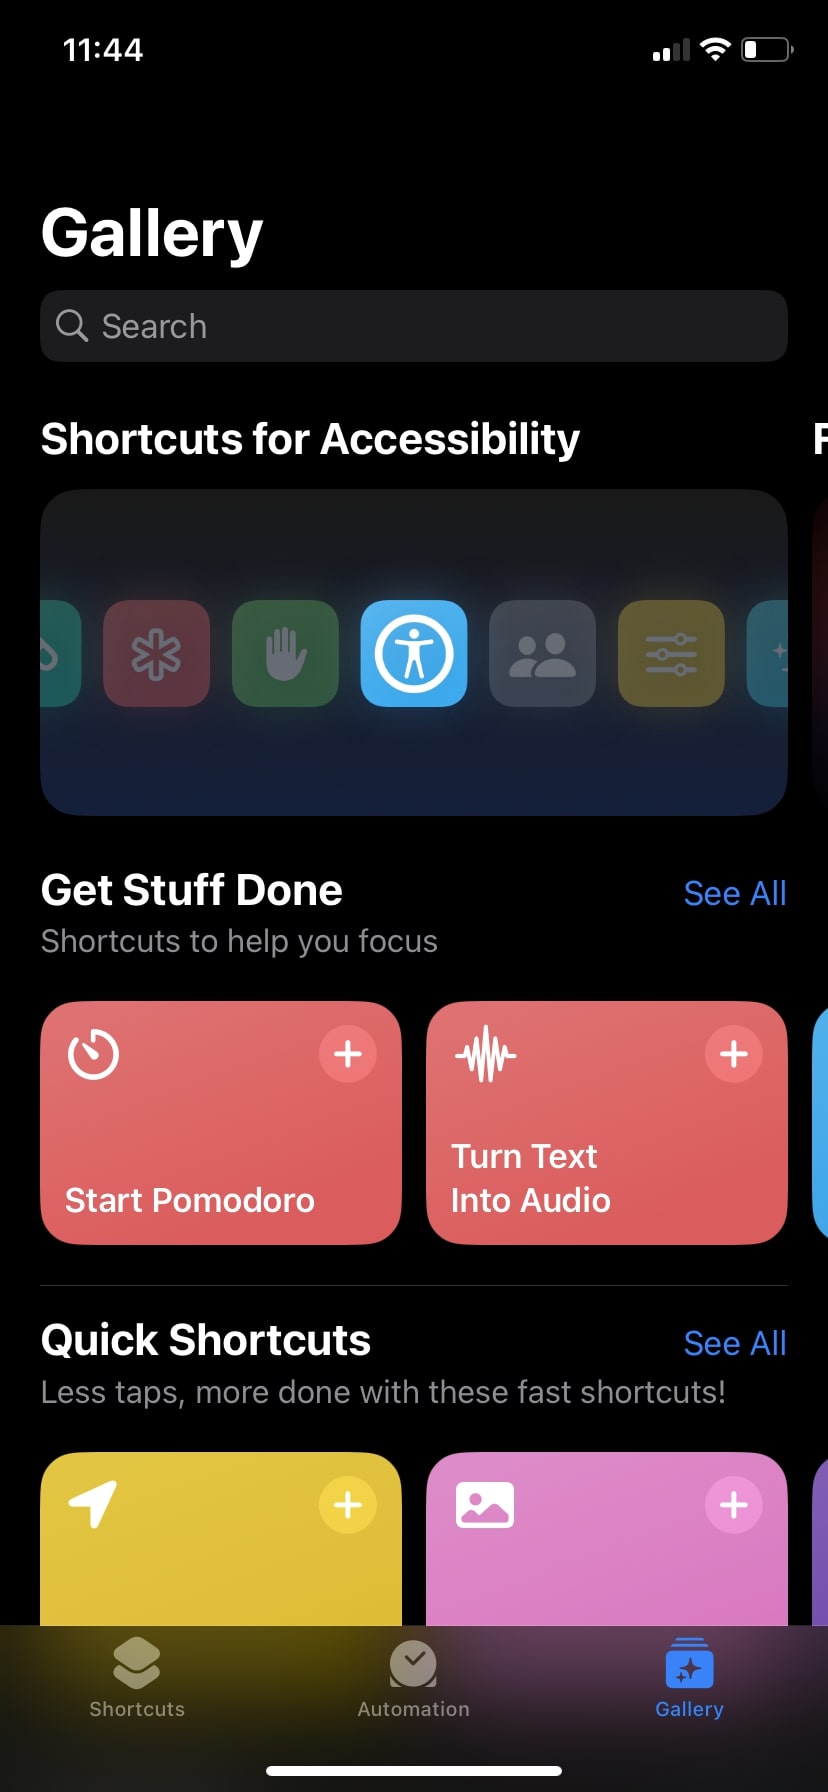 Shortcuts app Gallary section